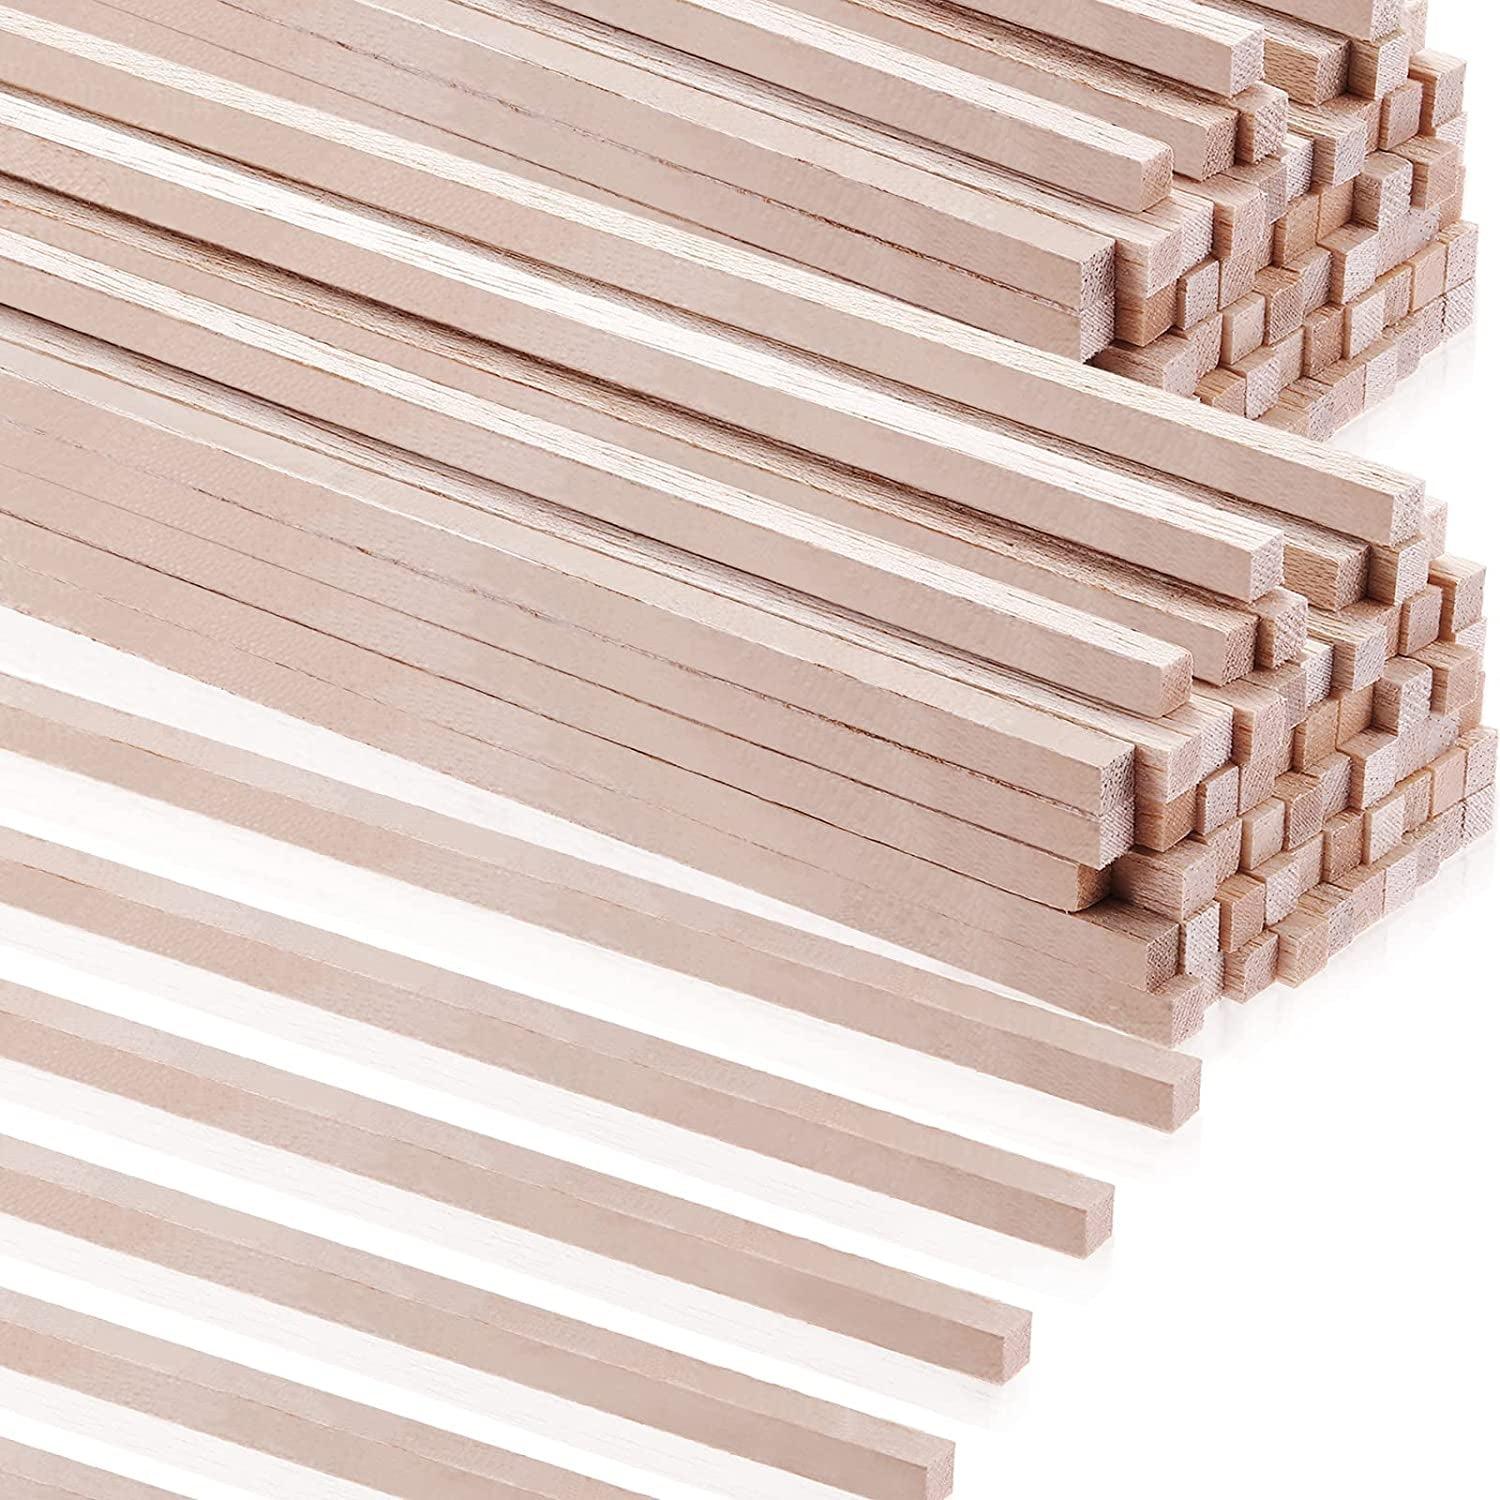 Balsa Wood Sticks 1/8 X 1/8 X 12 Inch Hardwood Square Dowels Unfinished Wooden Strips (60 Pieces) - WoodArtSupply